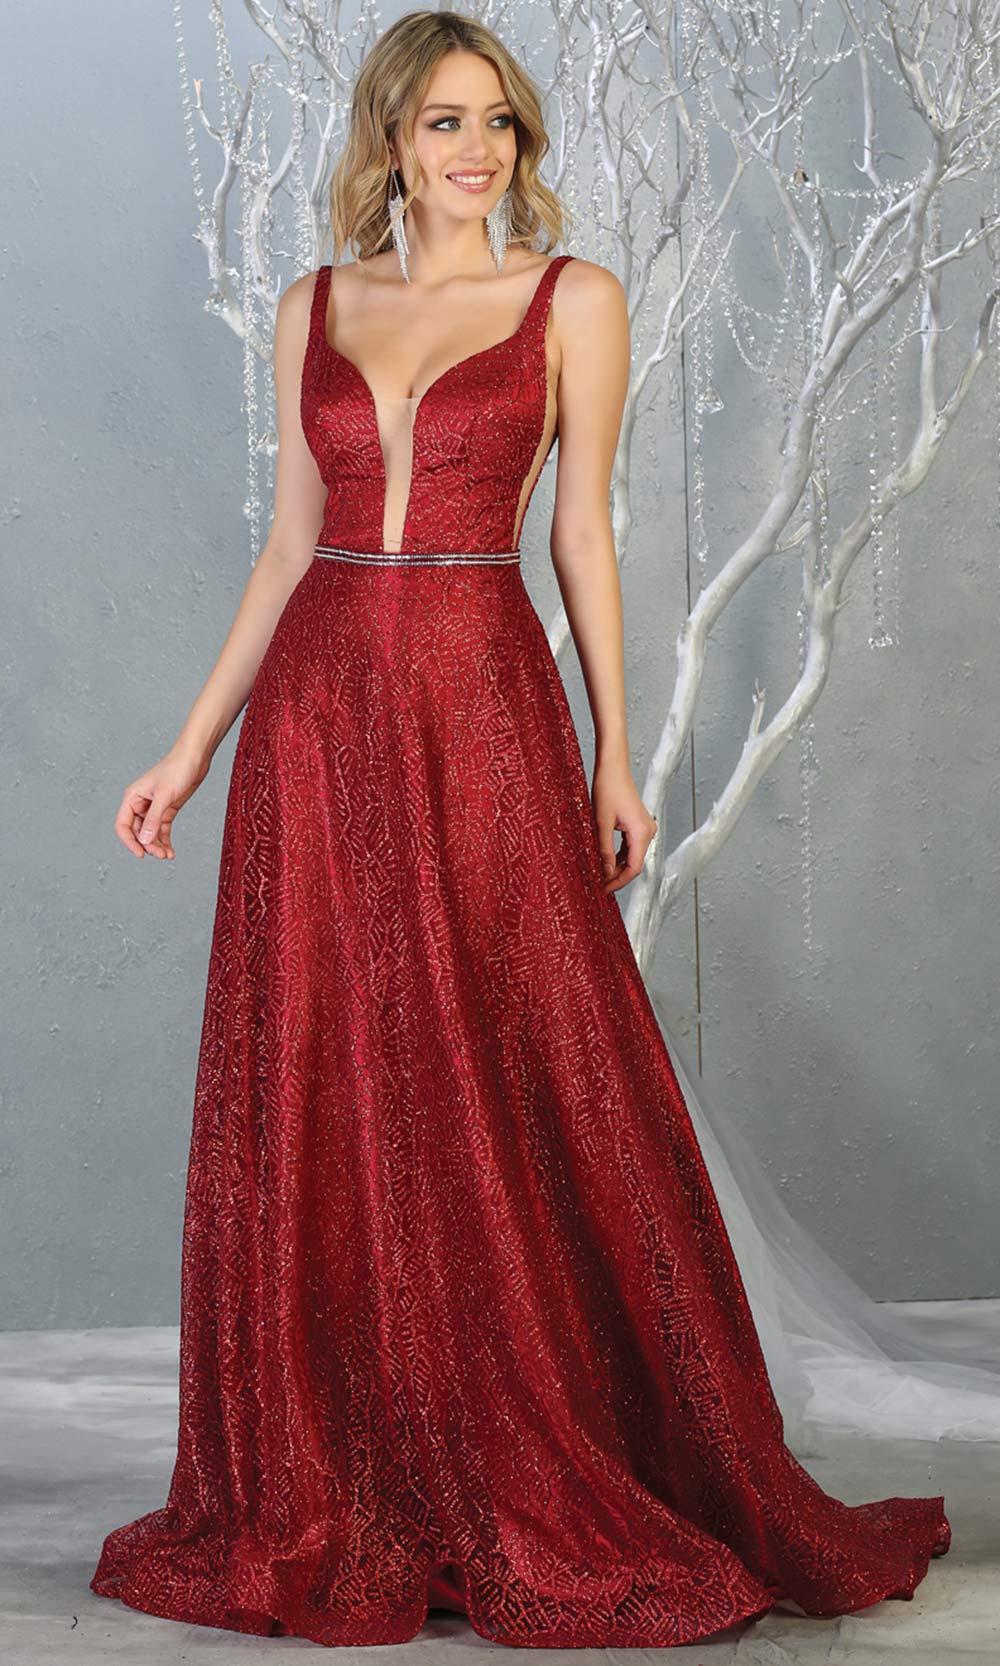 Mayqueen MQ1771 long burgundy red v neck flowy glittery sequin dress with low back. Perfect for prom, engagement dress, e-shoot dress, formal wedding guest dress, debut, quinceanera, sweet 16, gala. Plus sizes avail in this dark red semi ballgown.jpg